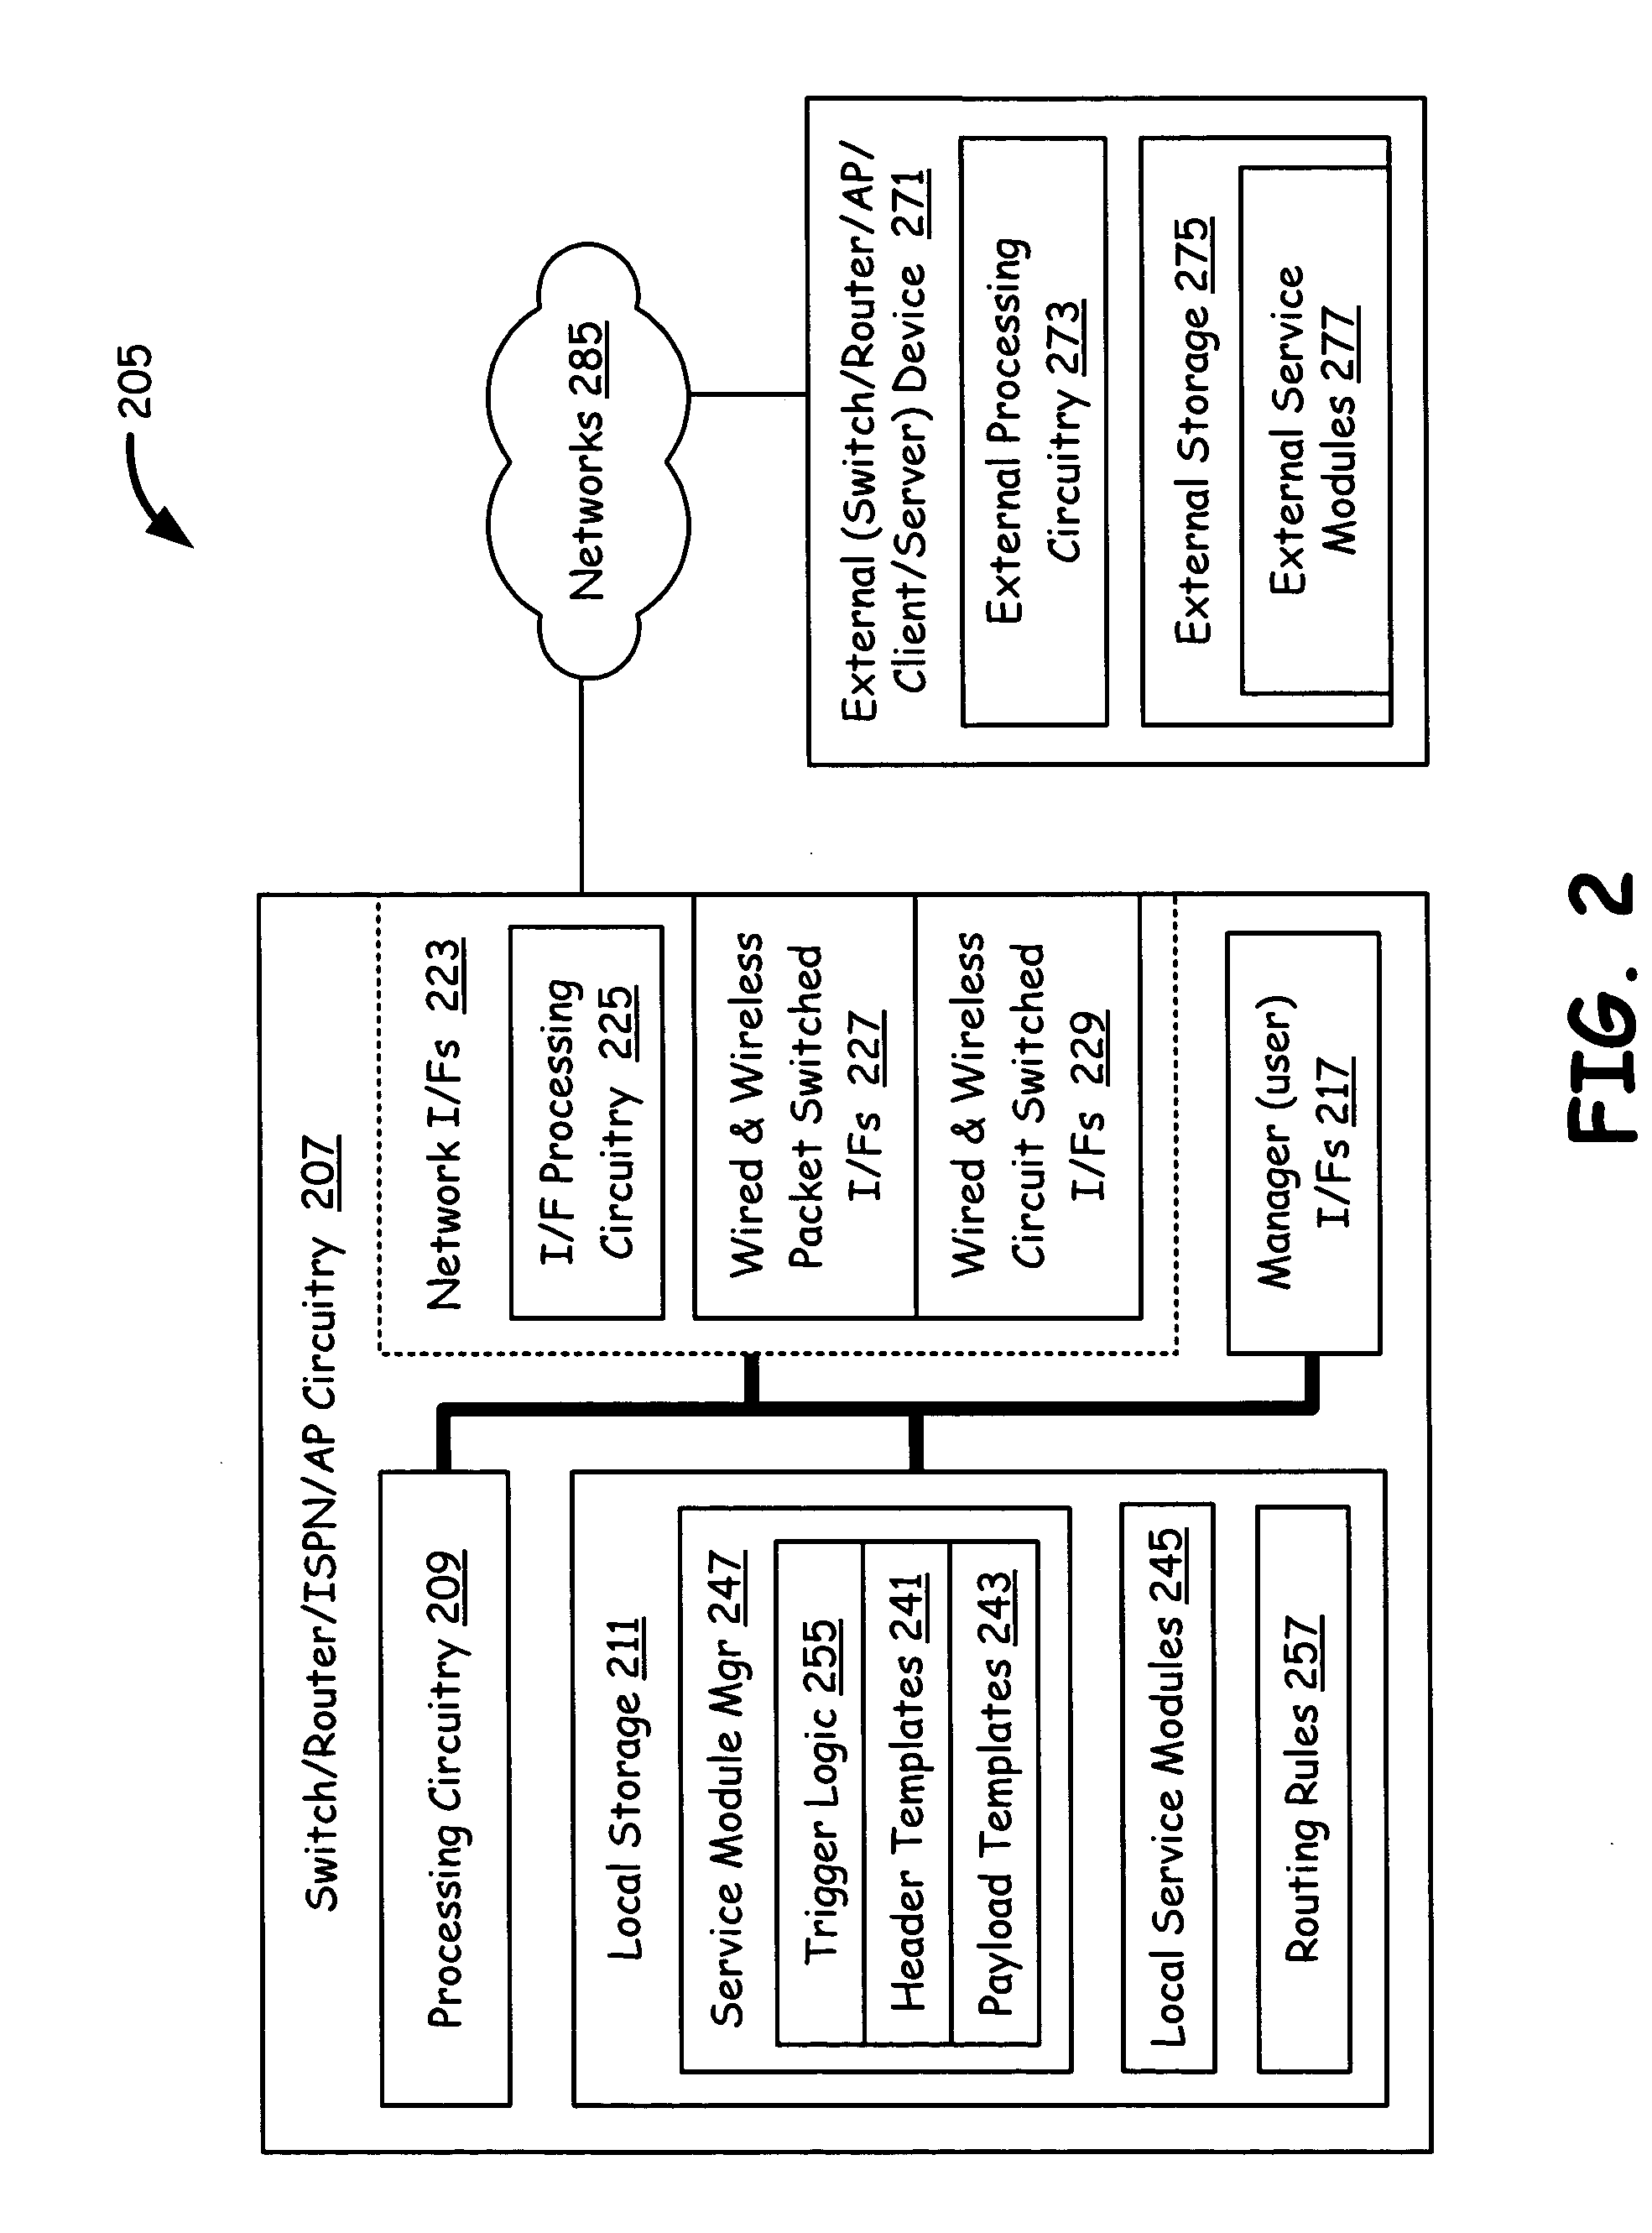 Packet routing with payload analysis, encapsulation and service module vectoring